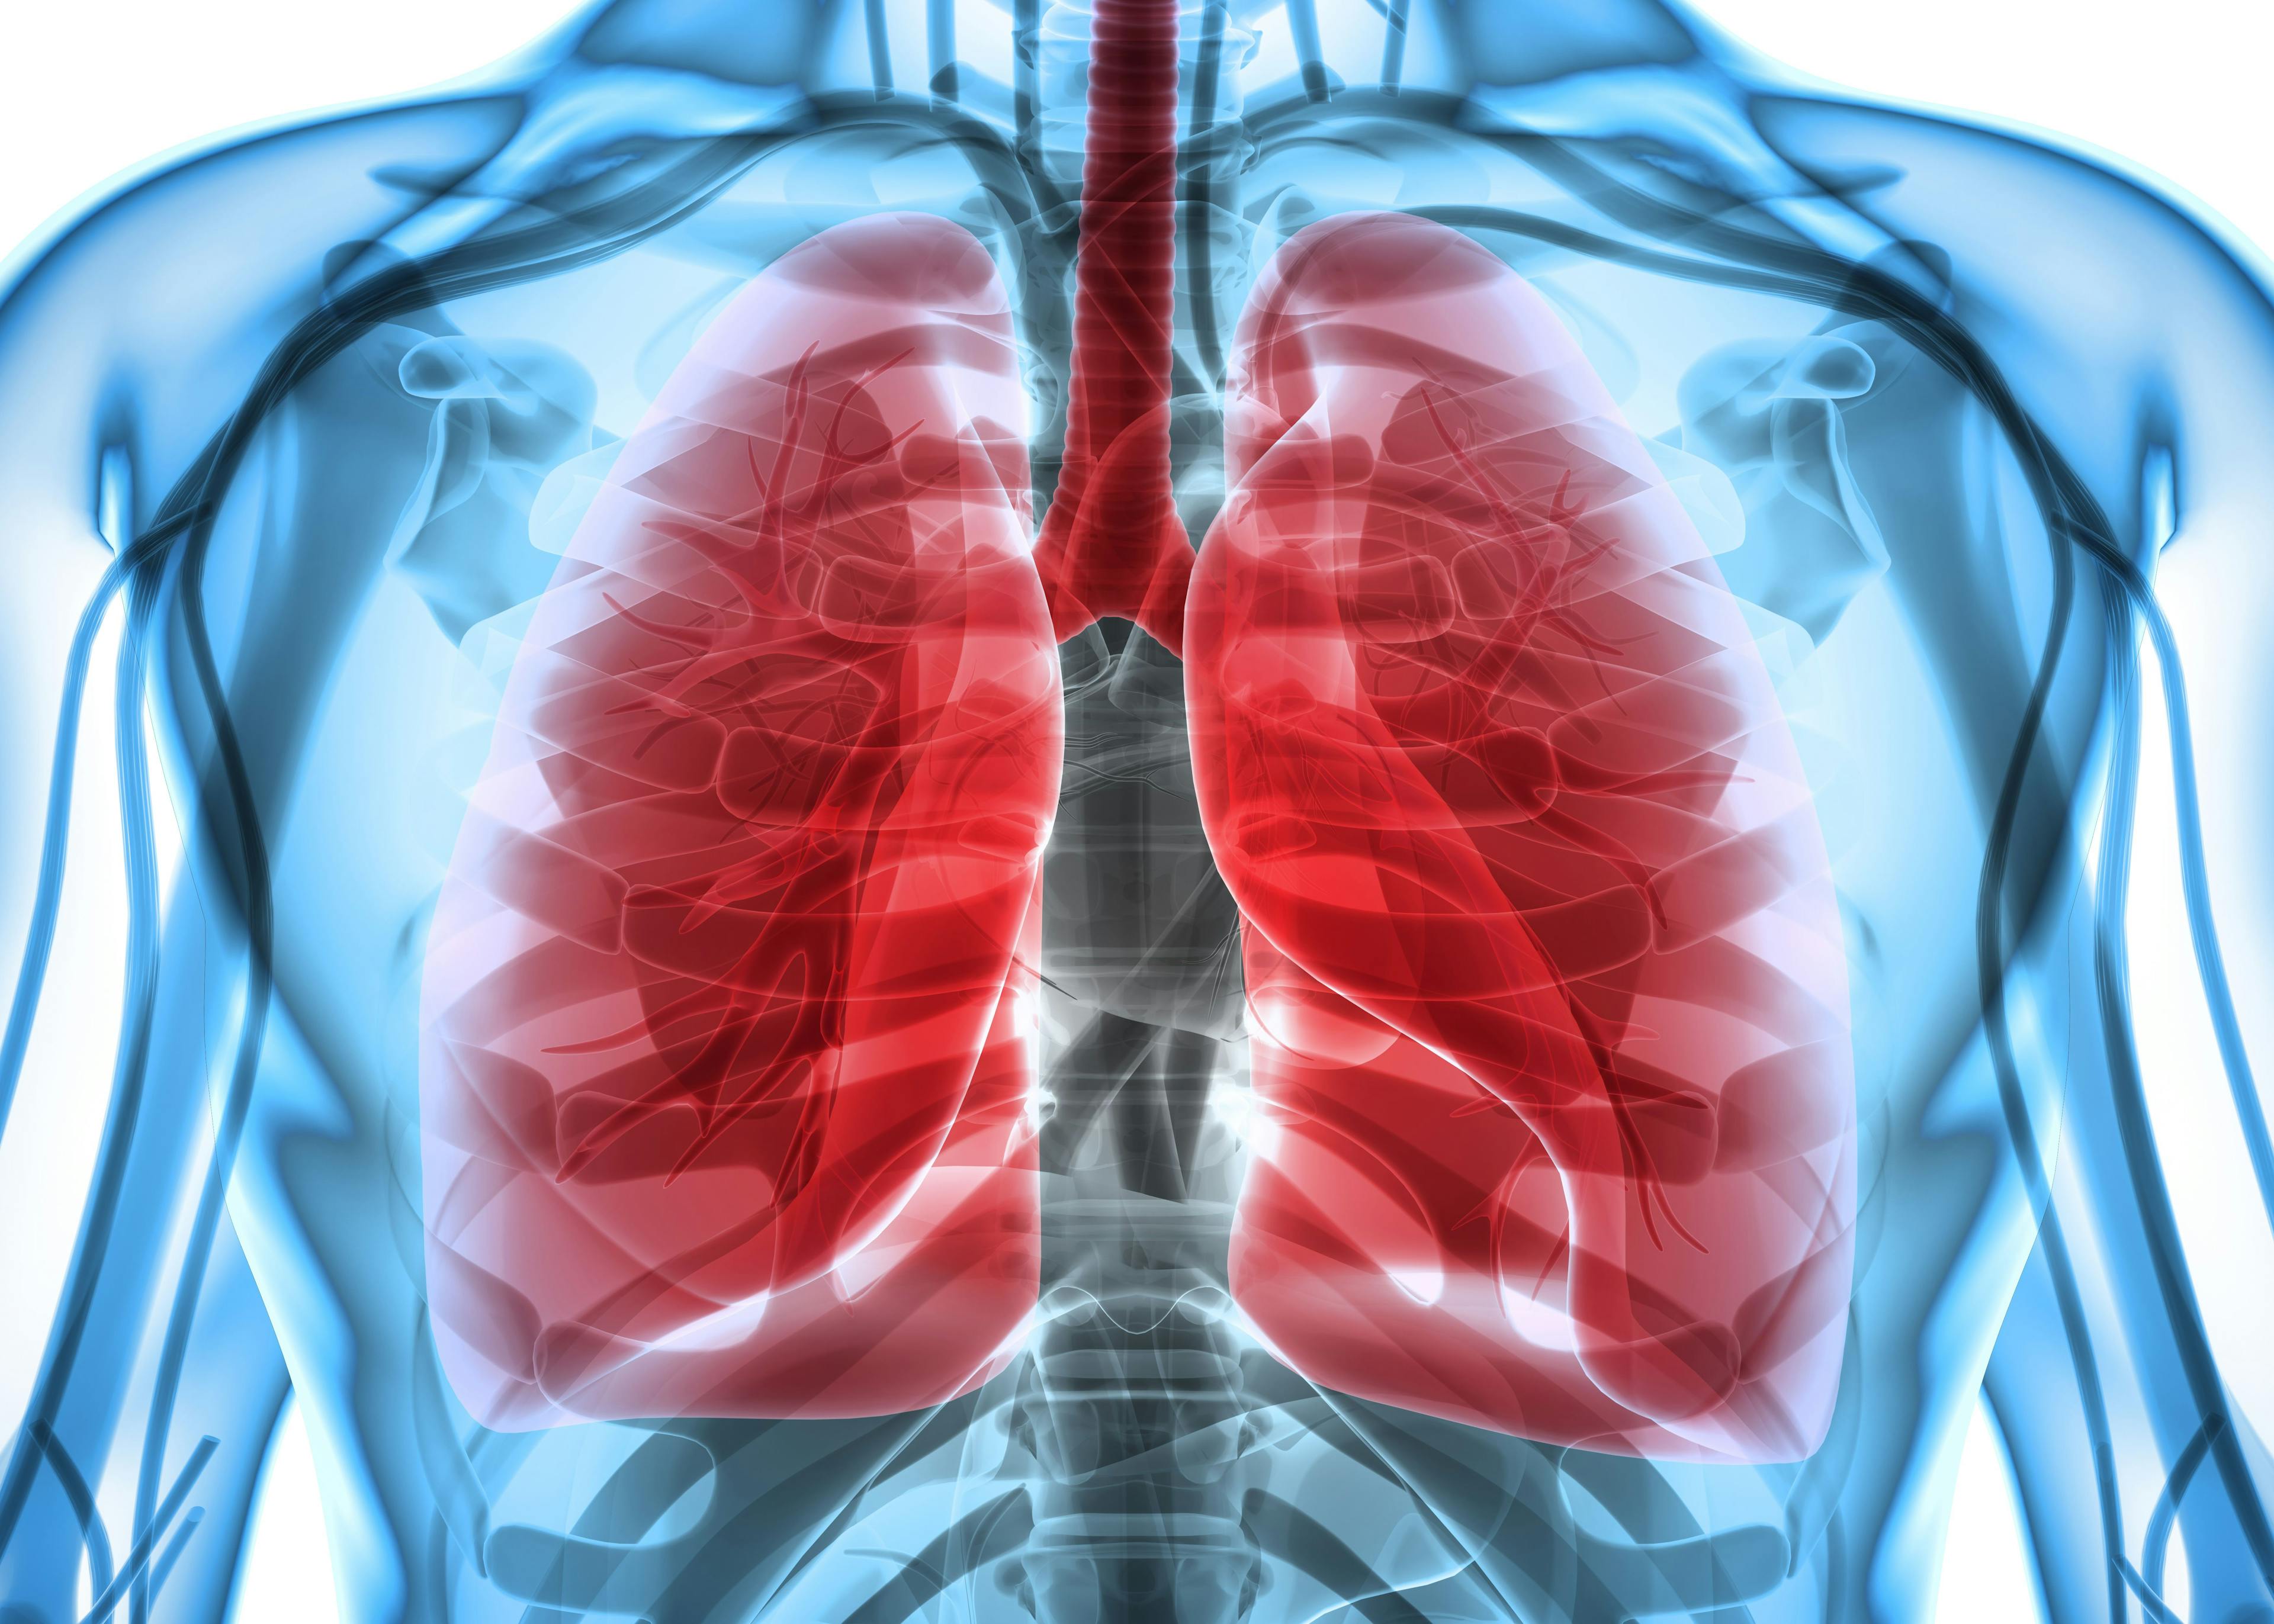 Researchers Identify Predictors of Pulmonary Hypertension Among Patients With MPNs